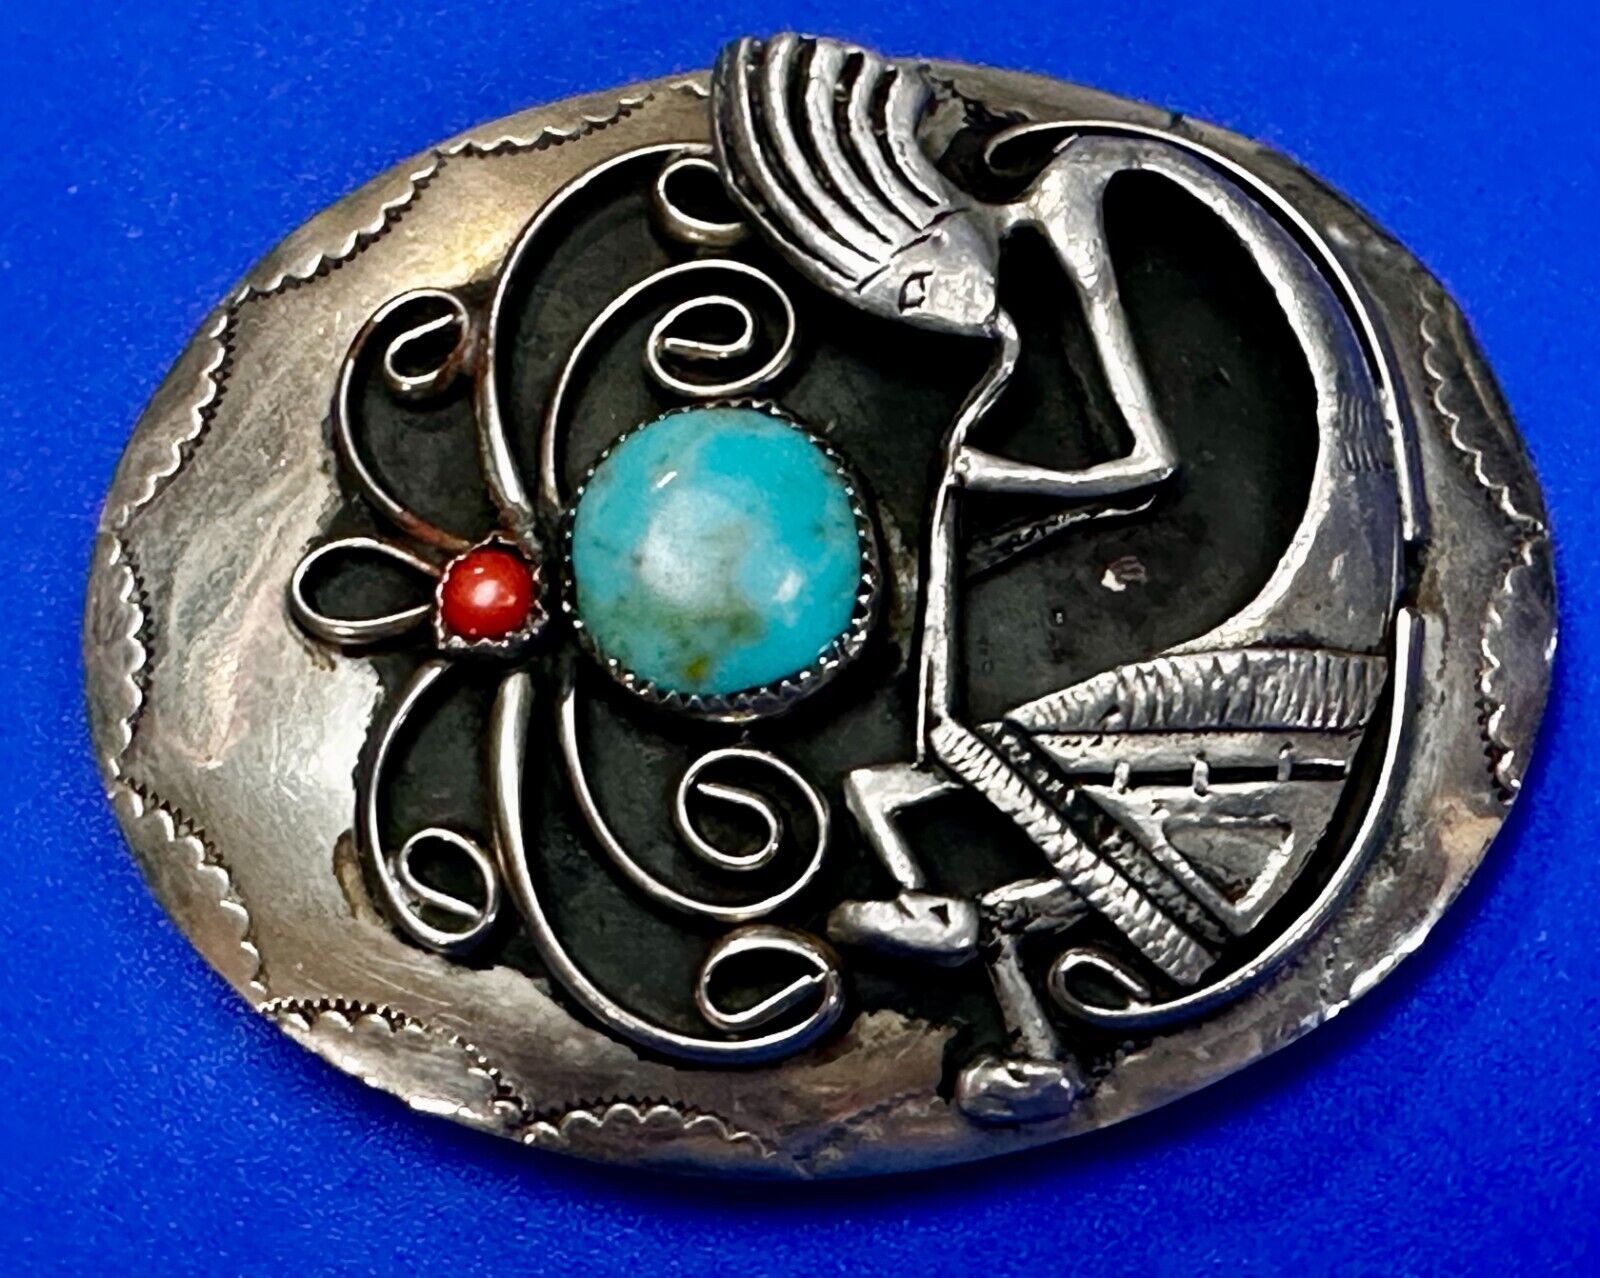 Kokopelli Humpbacked Flute Player Turquoise Coral Native Indian Art Belt Buckle